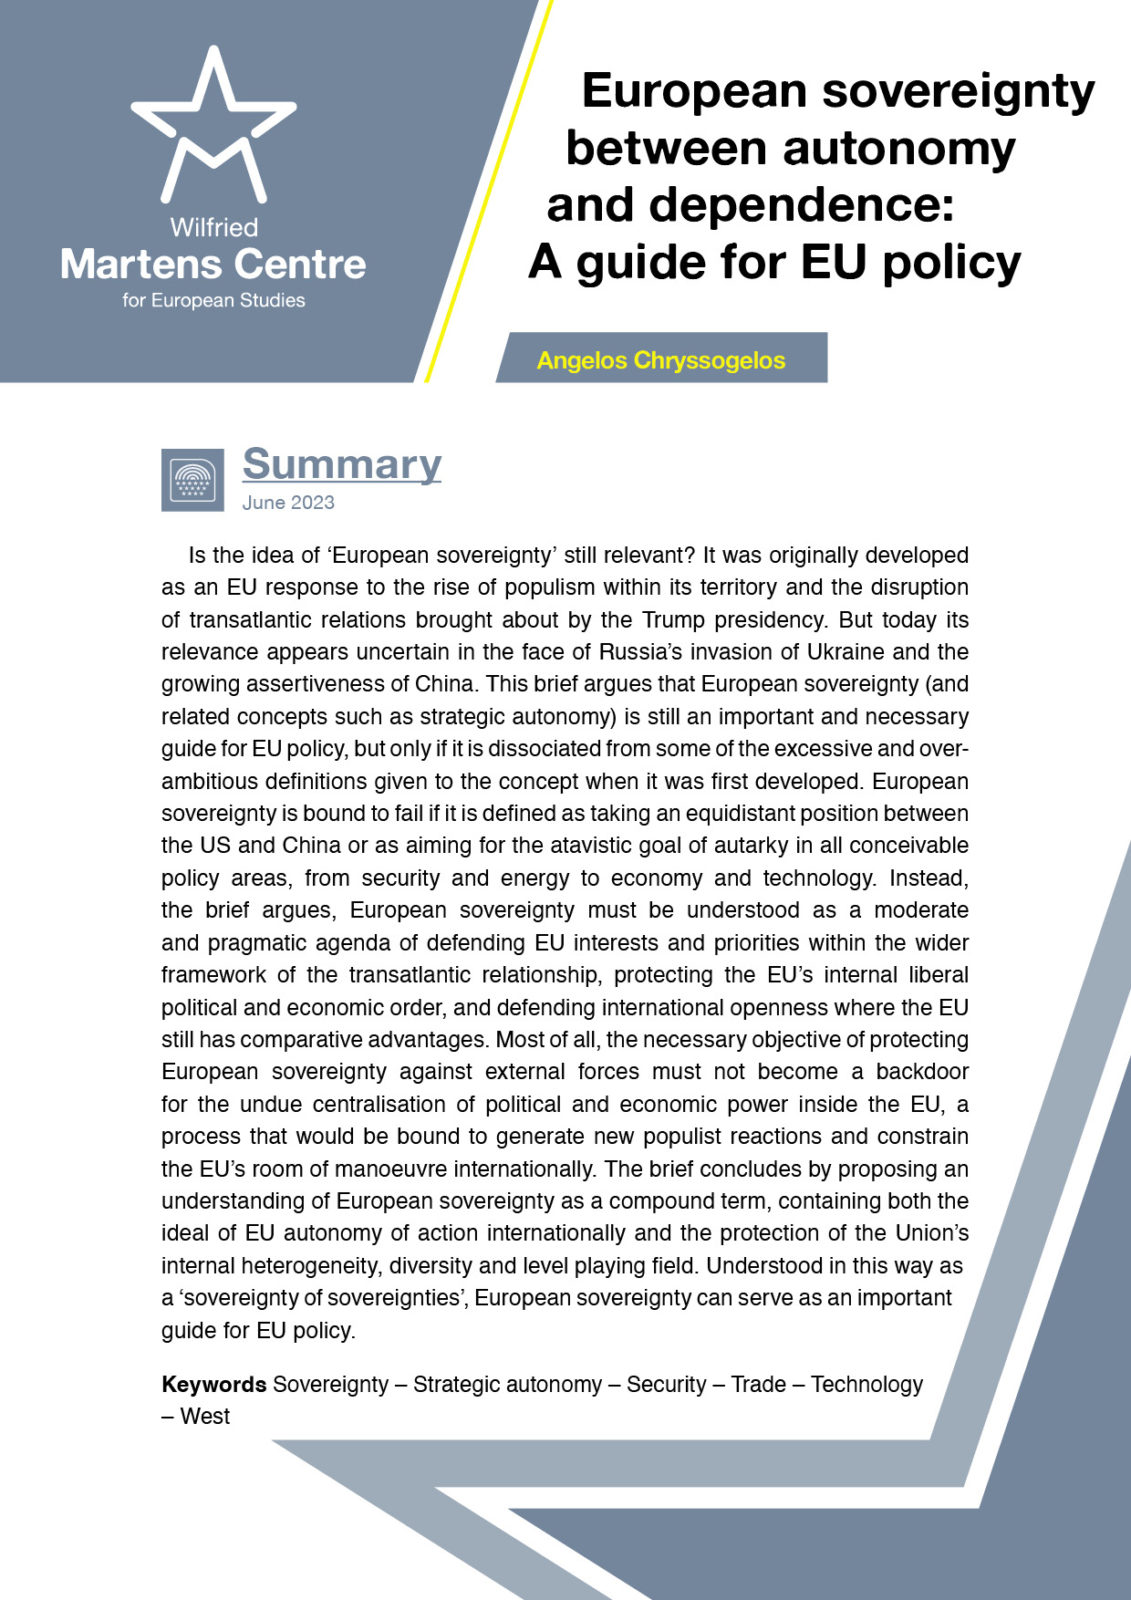 European sovereignty between autonomy and dependence: A guide for EU policy